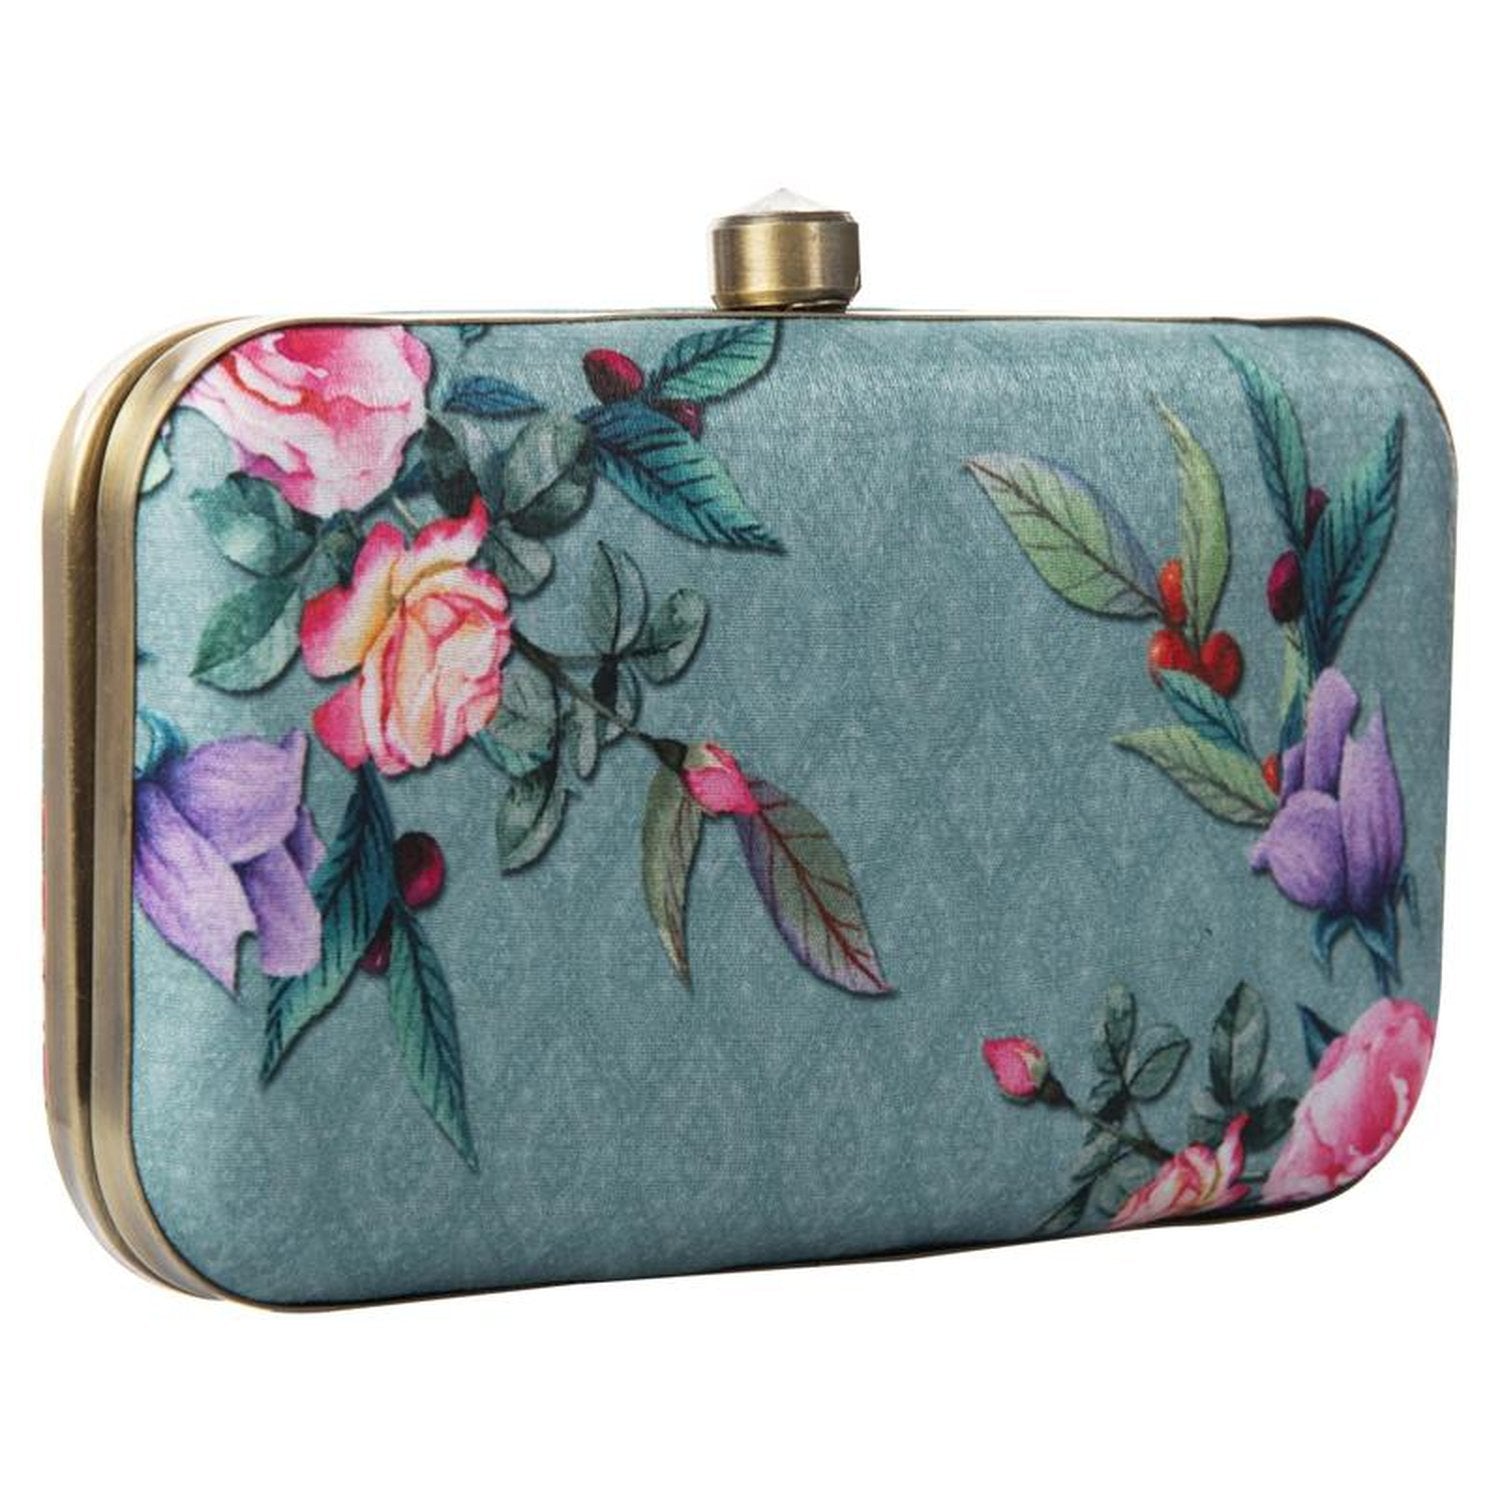 Floral Print Designer Leather Shoulder Tote Bag With Wallet Classic Trio  Messenger Bag For Women, Ideal For Presbyopic Purse, Evening Clutch And  Shopper From Hotbags888, $58.45 | DHgate.Com